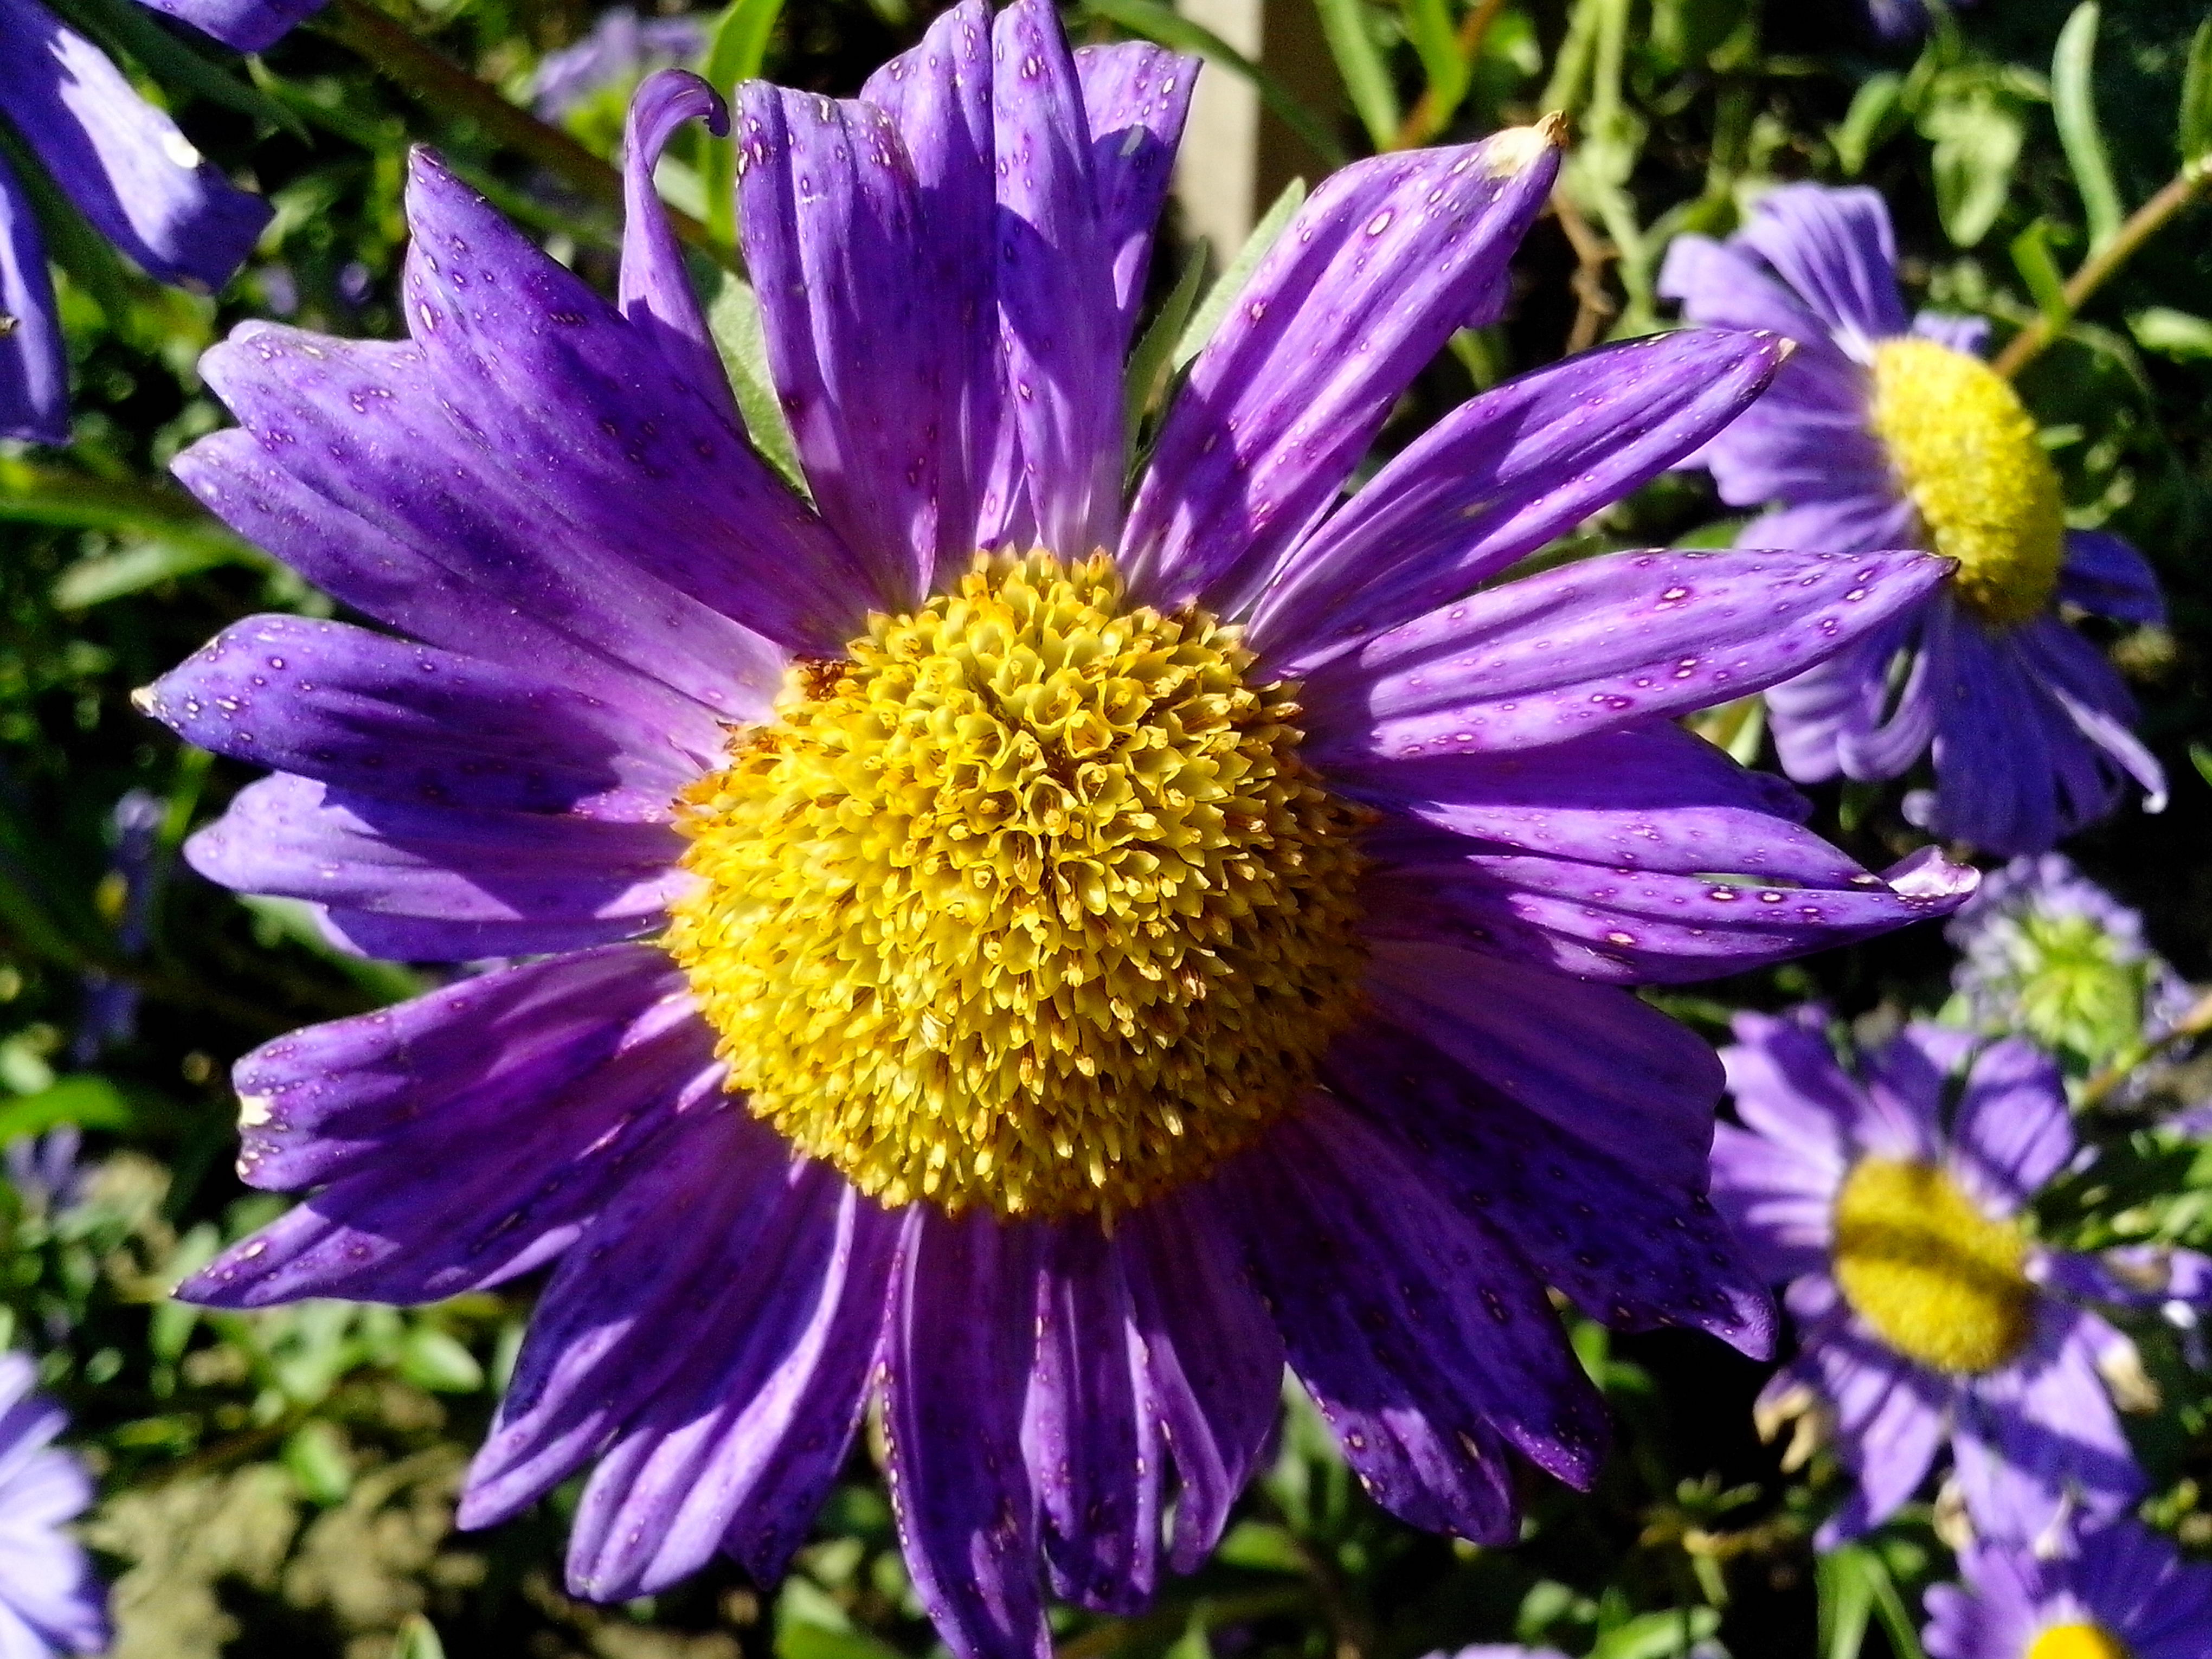 Purple And Yellow Flowers Names And Pictures - Know Your Flowers 4 ...